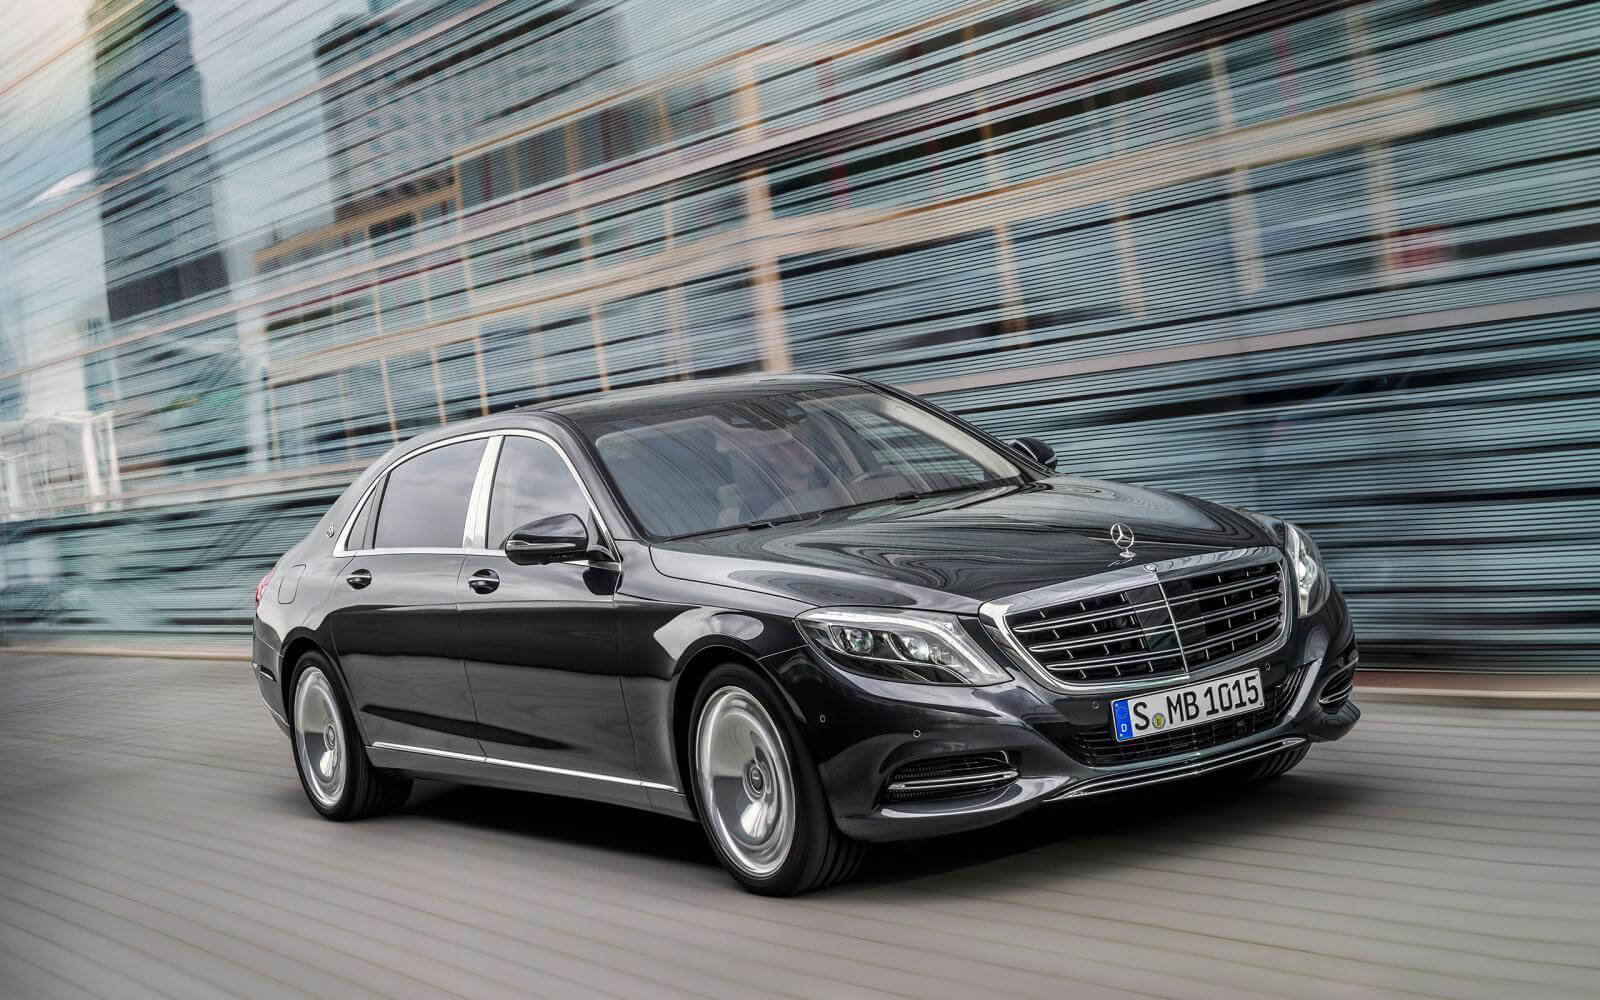 Mercedes Maybach S600 Price In India - HD Wallpaper 